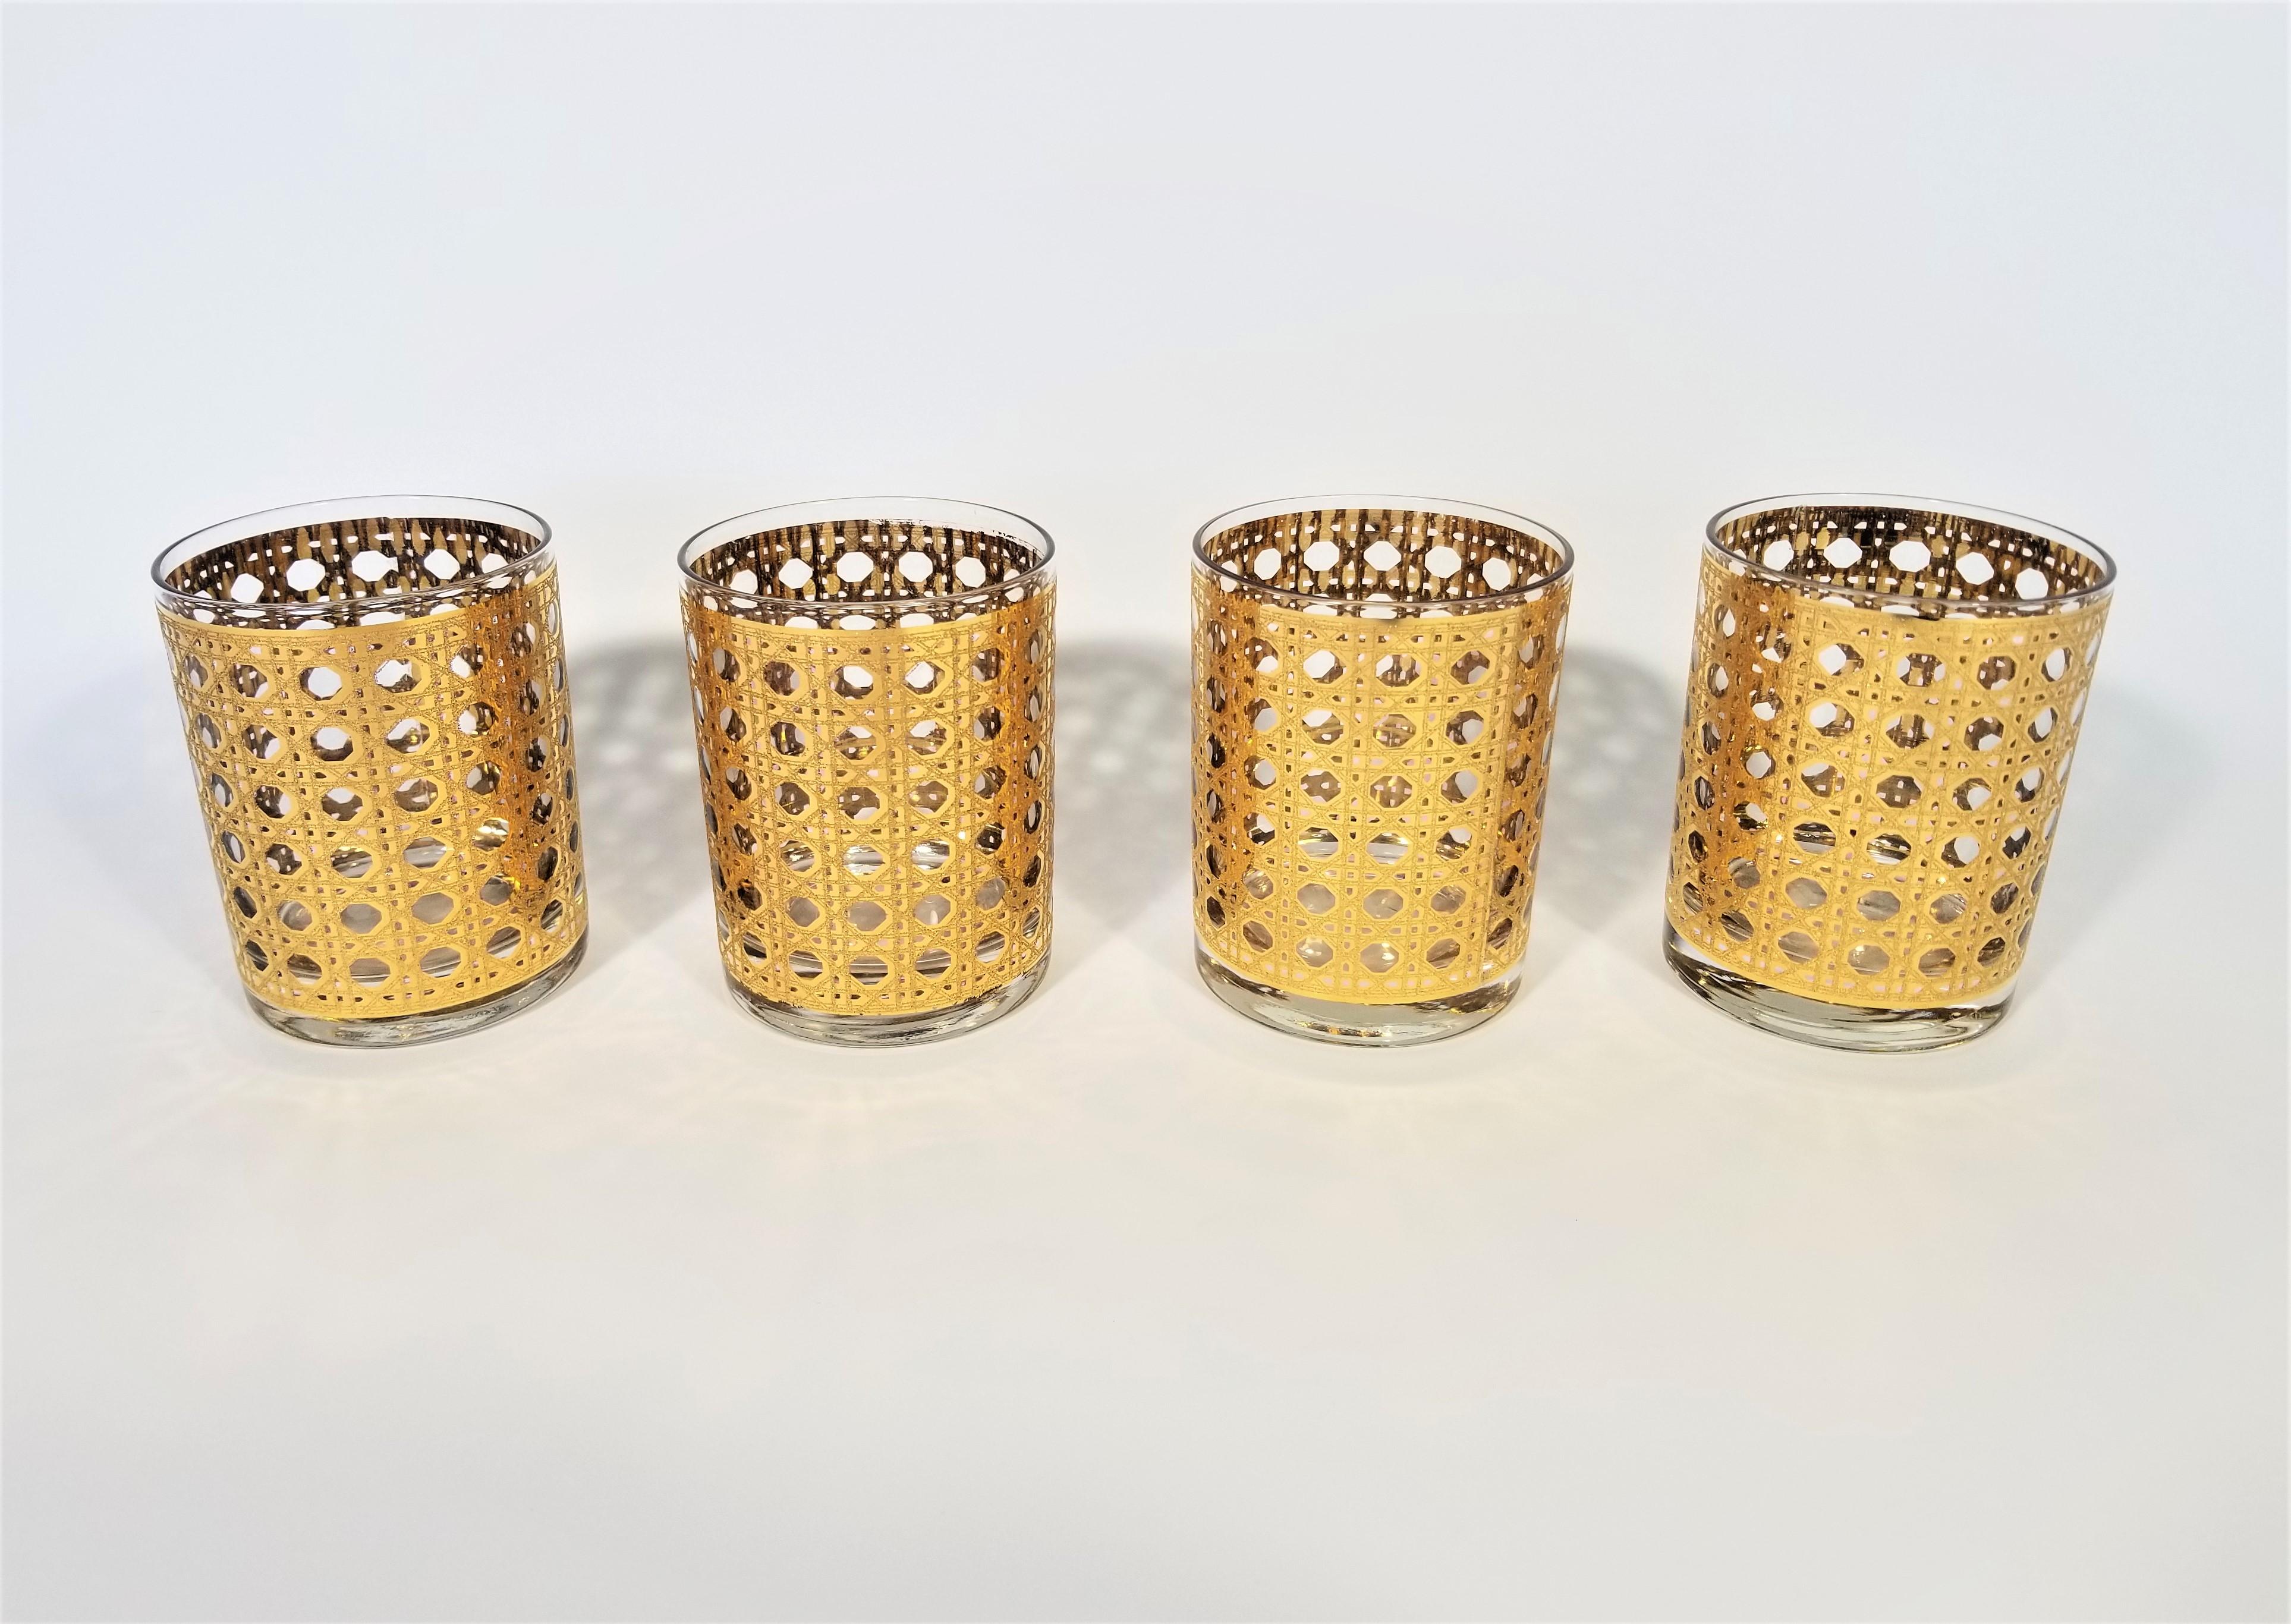 Midcentury 1960s-1970s set of 8 Culver glasses. Canella design. 22 karat Gold designed to resemble the pattern of cane or caning. Beautiful addition to any bar or table. Excellent condition.